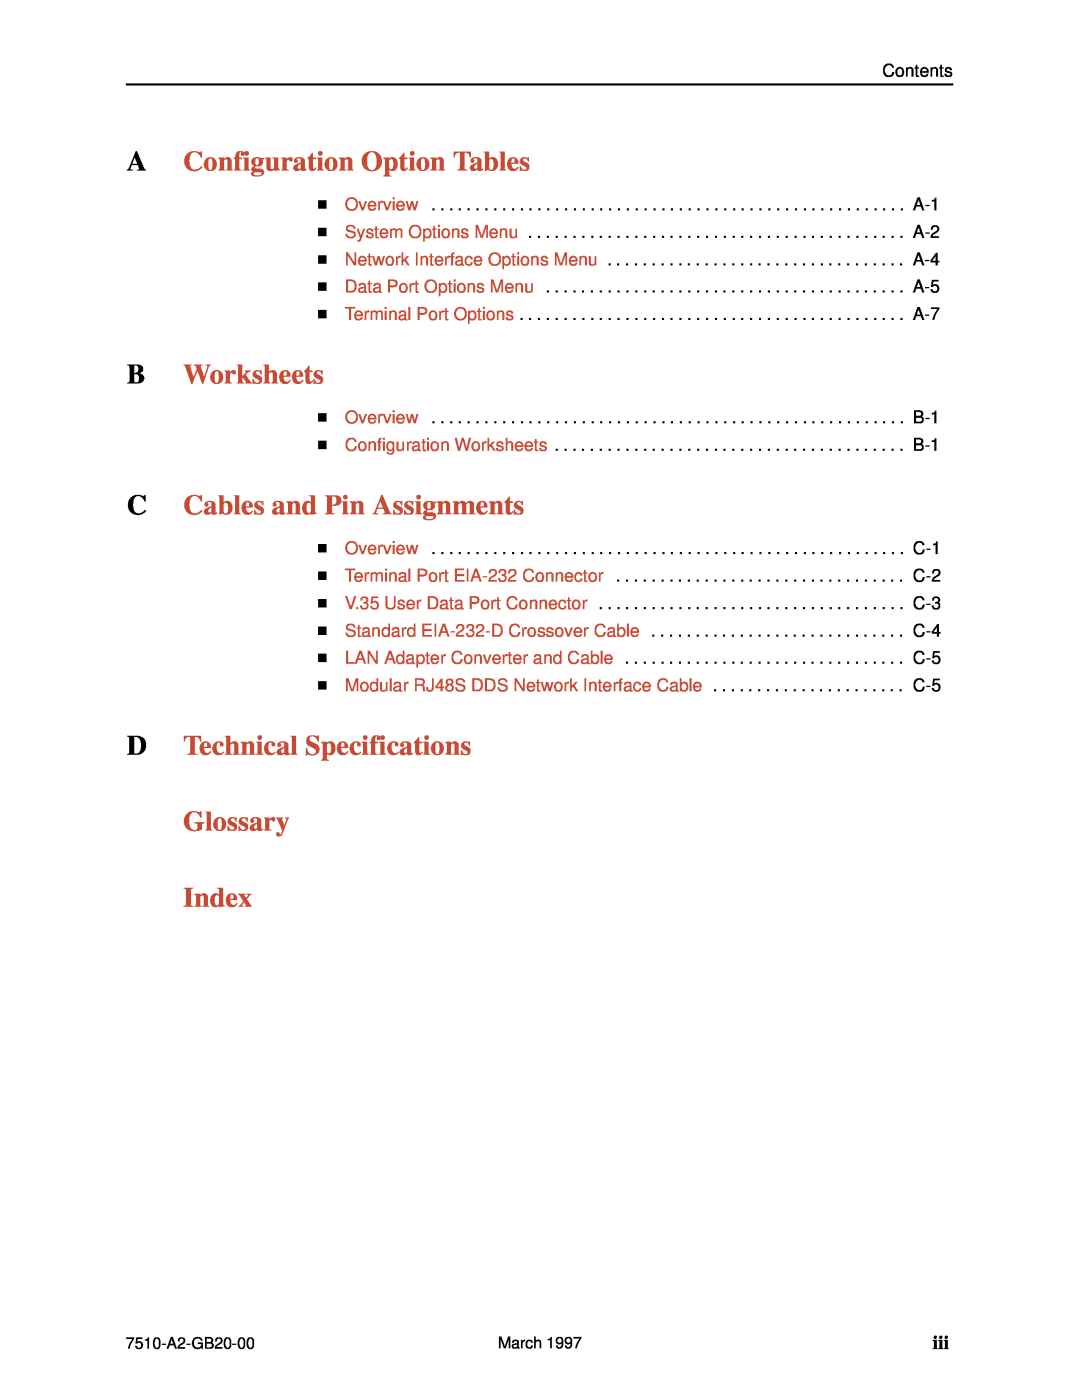 Paradyne 727 manual AConfiguration Option Tables, BWorksheets, CCables and Pin Assignments 